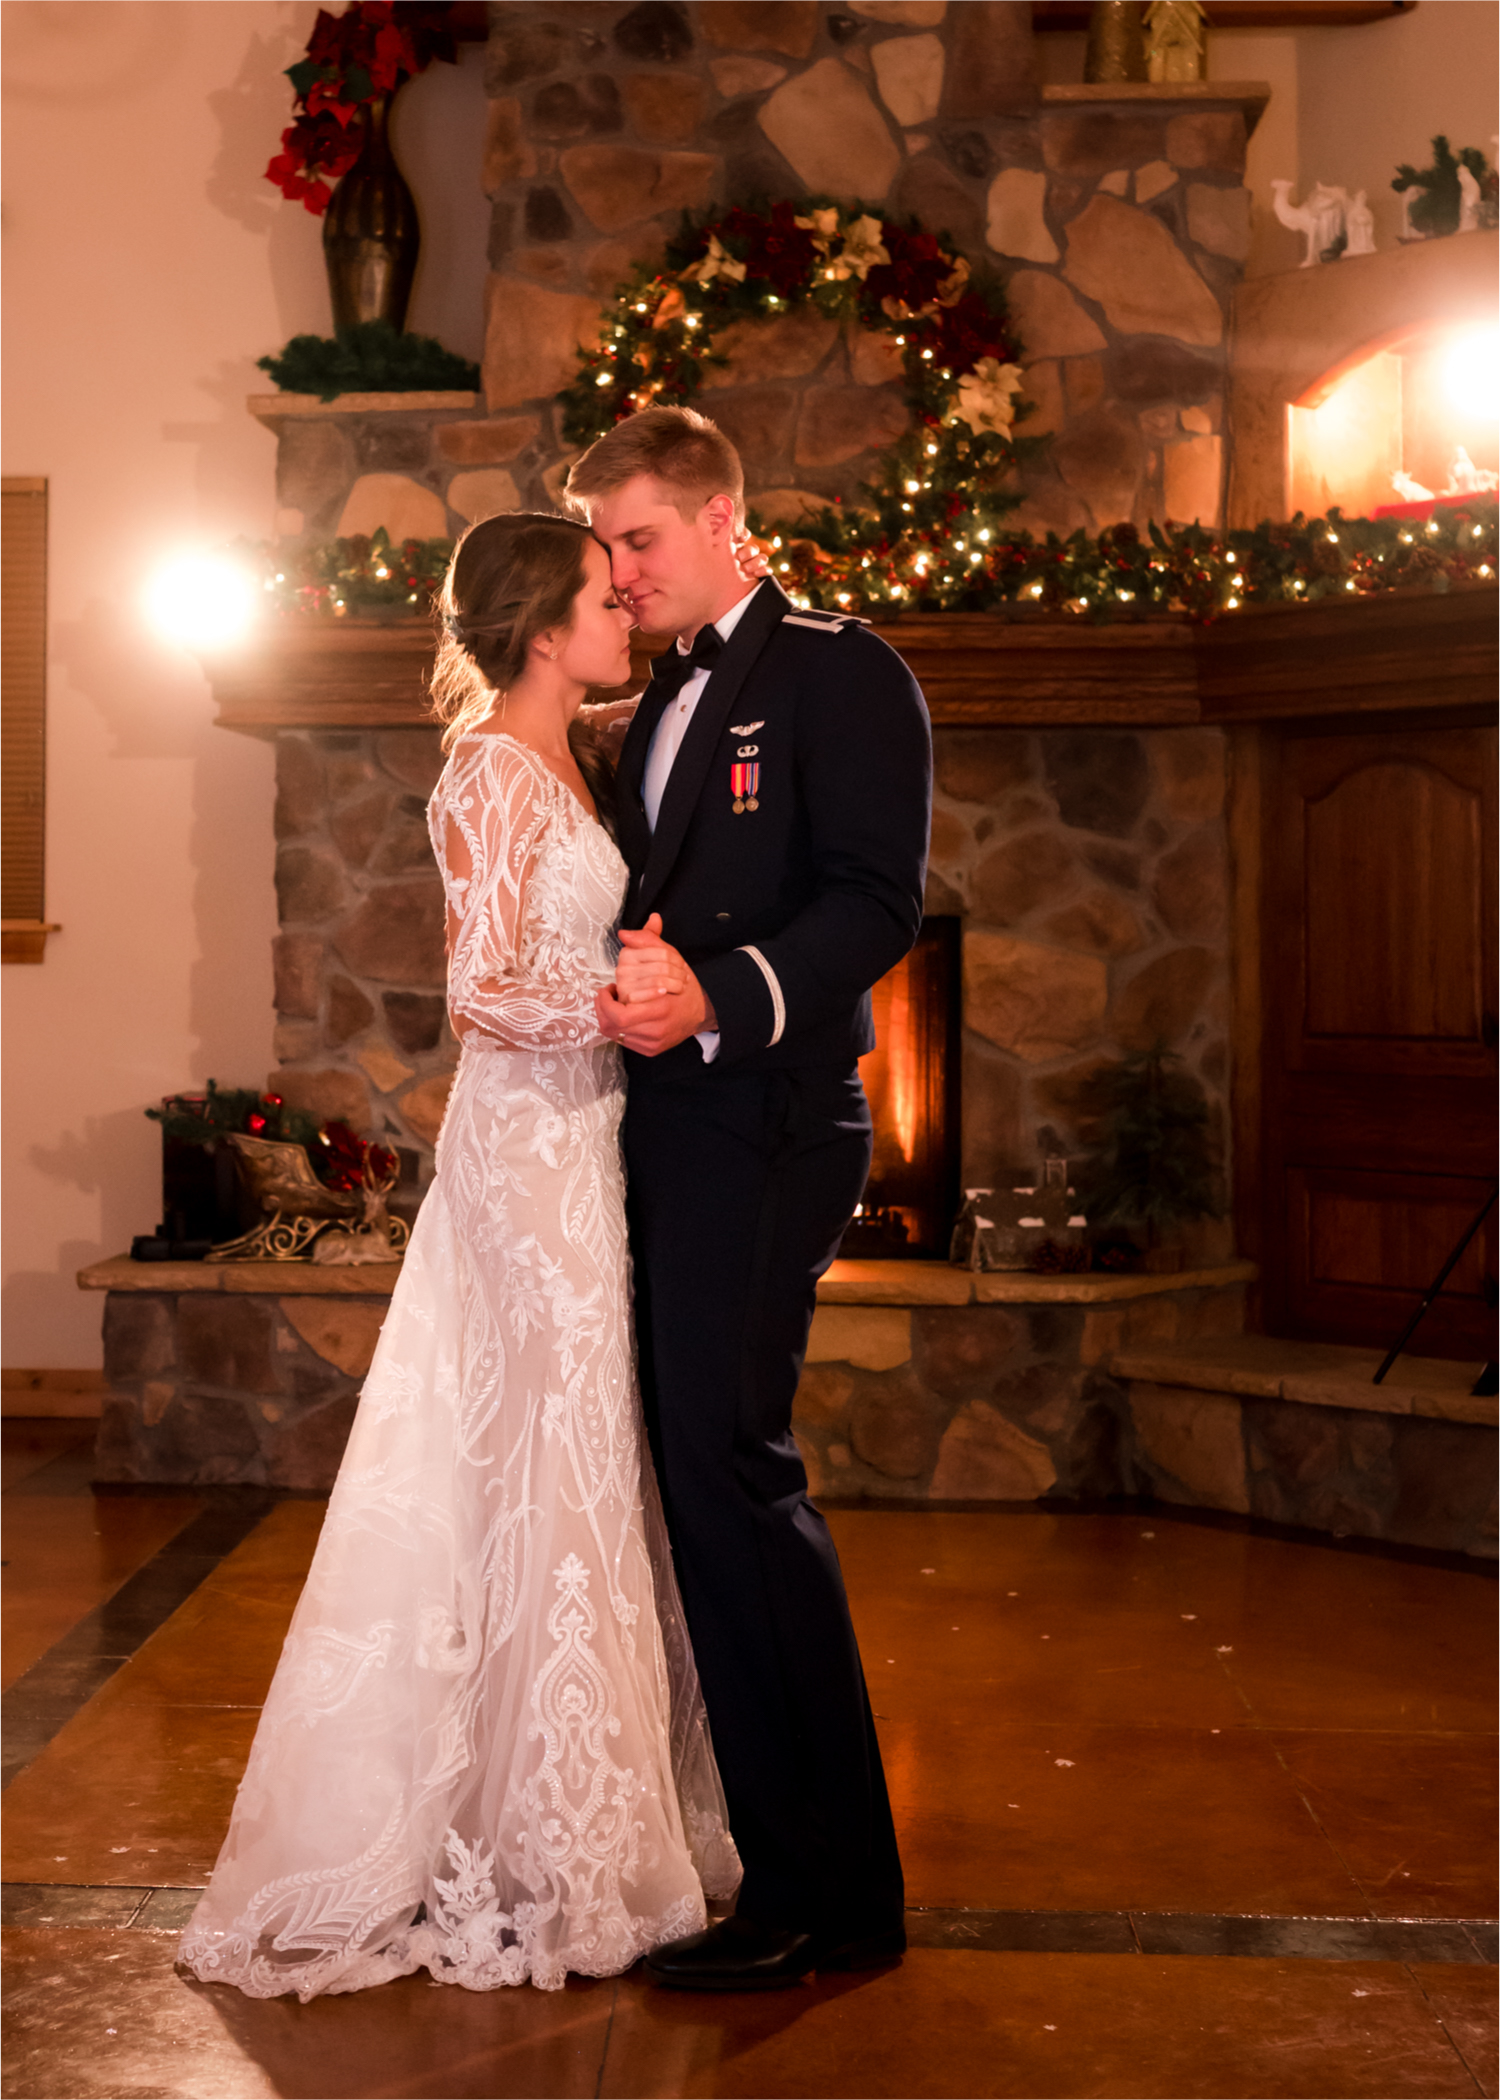 Winter Wonderland Wedding in Colorado Springs | Britni Girard Photography Colorado Wedding Photography and Film Team | Snow covered mountains and Christmas just a few days away | Annika + John's Nostalgic Winter Wedding | Bride's Dress iDream Bridal Essence of Australia | Air Force Academy | Rustic Winter Reception Bride and Groom Last Dance by Fireplace